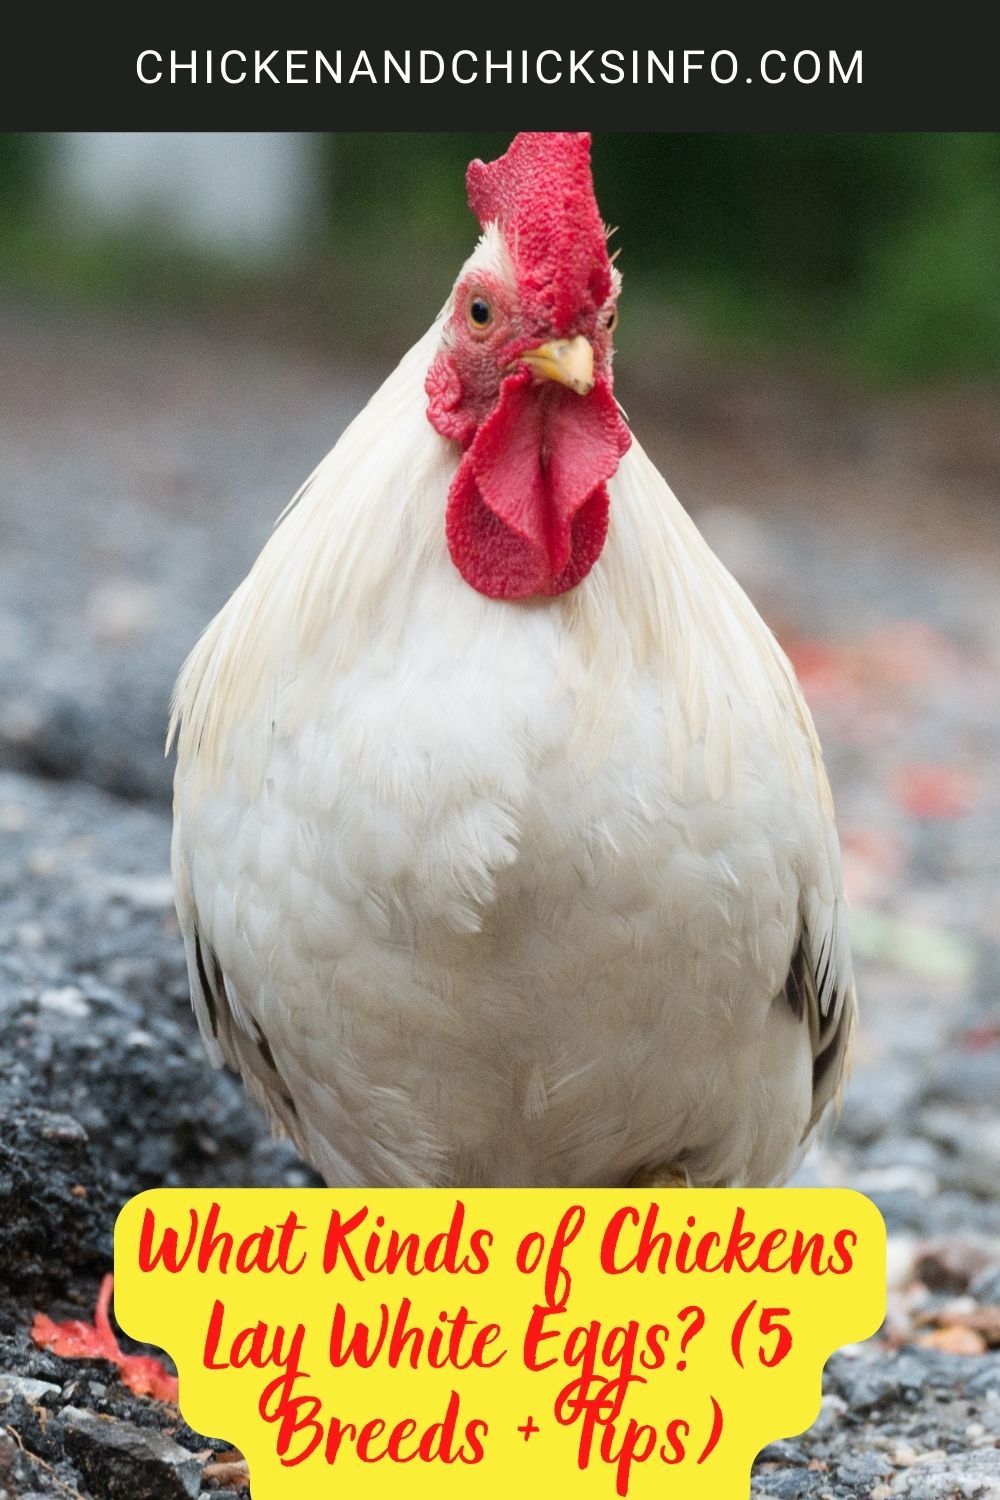 What Kinds of Chickens Lay White Eggs? (5 Breeds + Tips) poster.
